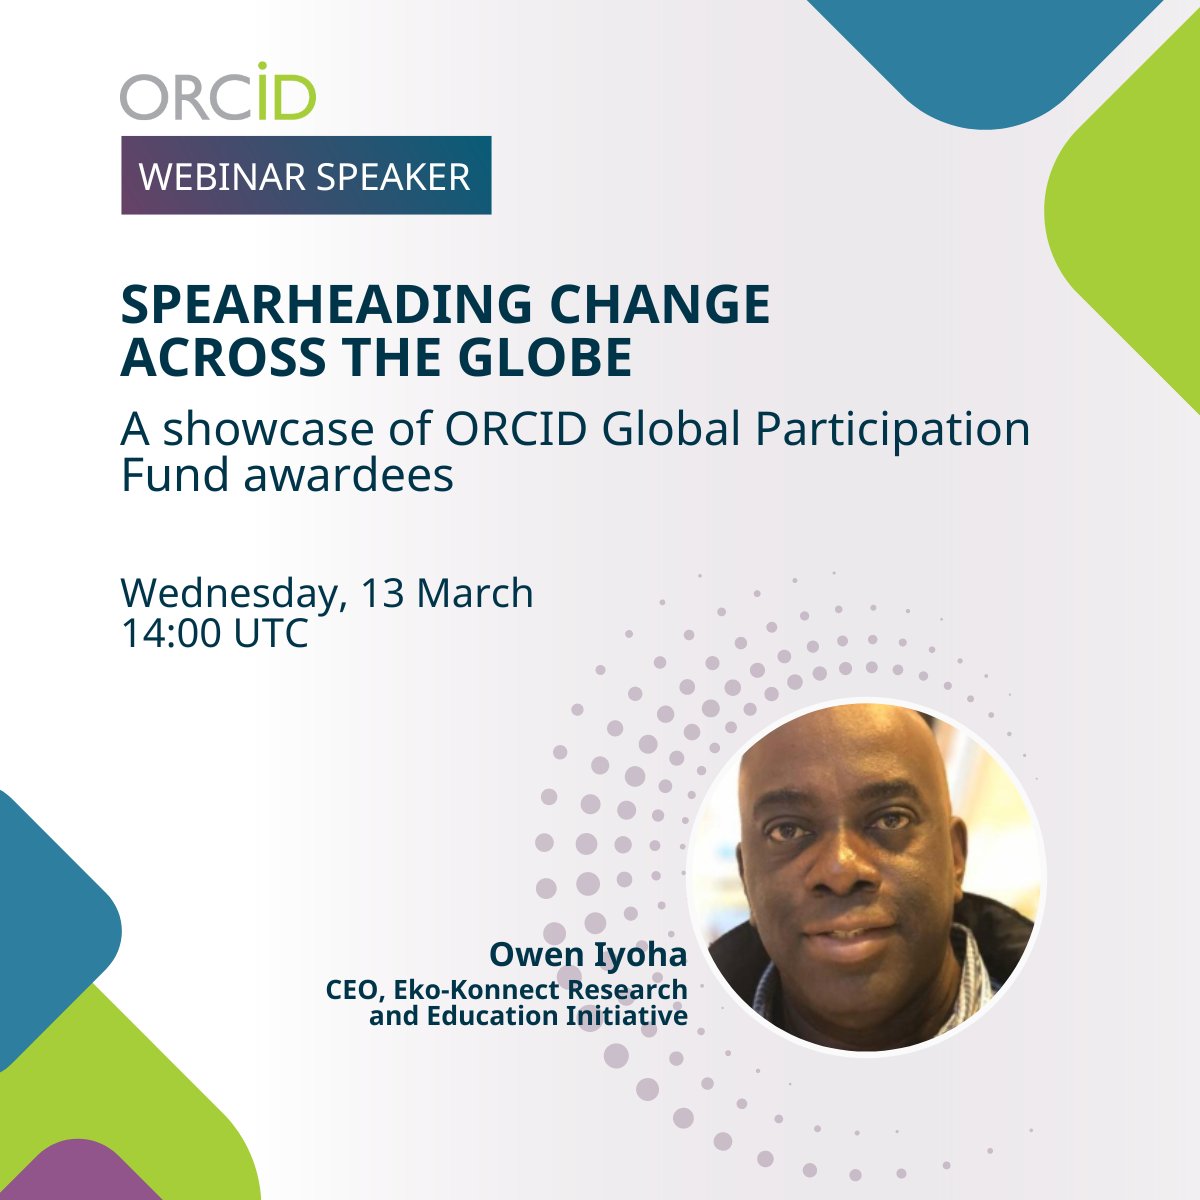 SPEAKER ANNOUNCEMENT 🗣️ On 13 March, @oiyoha, CEO of @ekokonnect joins us for Spearheading Change Across the Globe: A showcase of ORCID Global Participation Fund awardees. Save your spot now! bit.ly/3SUwJZf